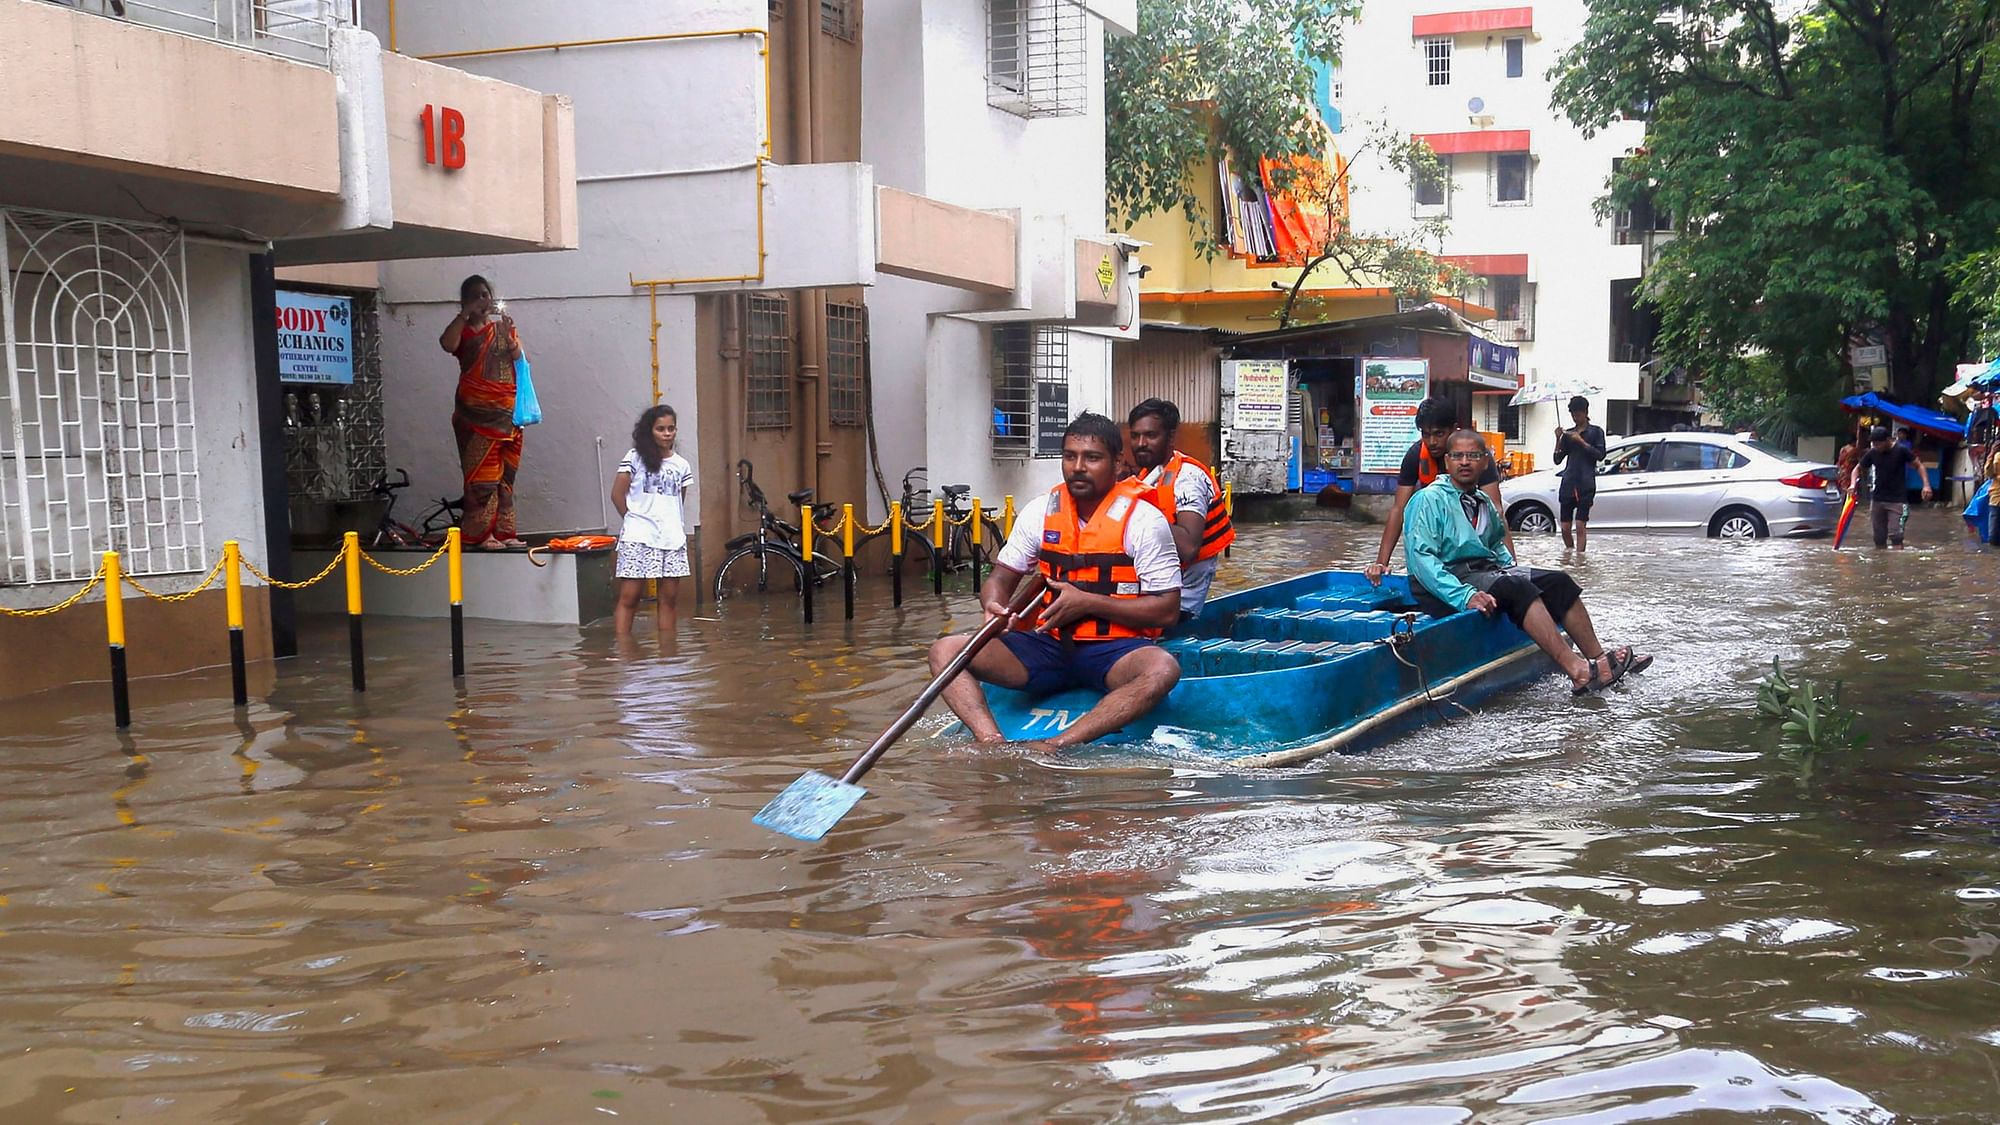 A waterlogged street in Thane after heavy rains on 3 August.